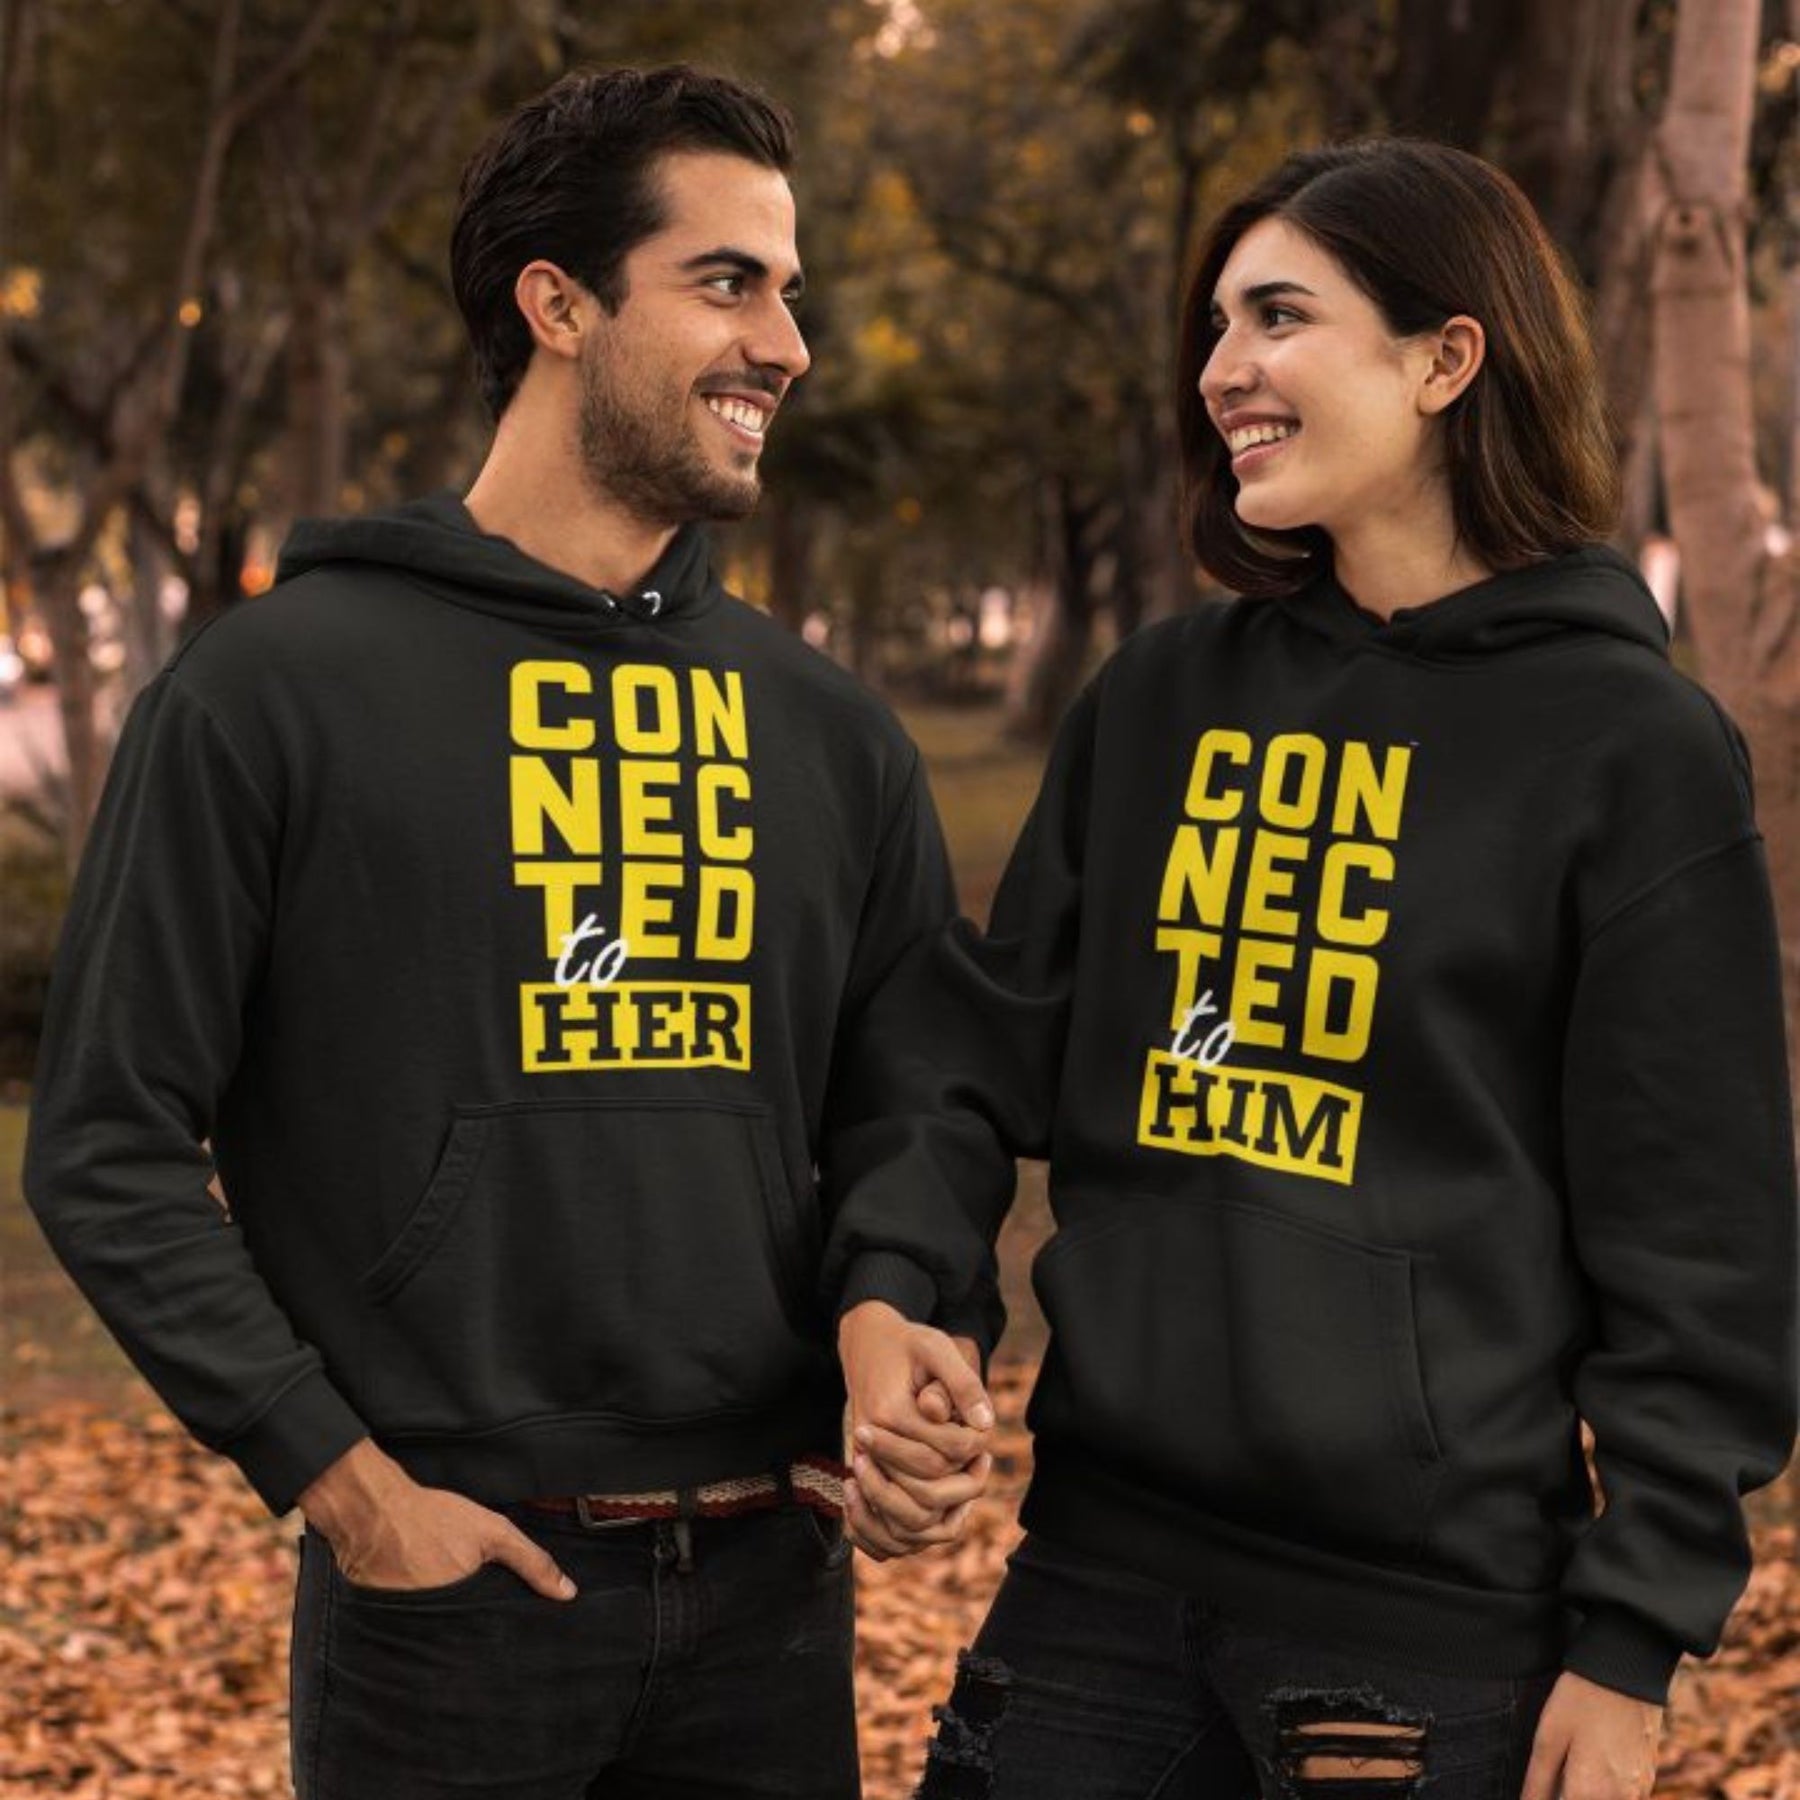 connected-to-her-and-him-cotton-printed-black-couple-hoodies-gogirgit-com_849c5a1e-fe5c-4a65-a7ea-eac7cf290db4